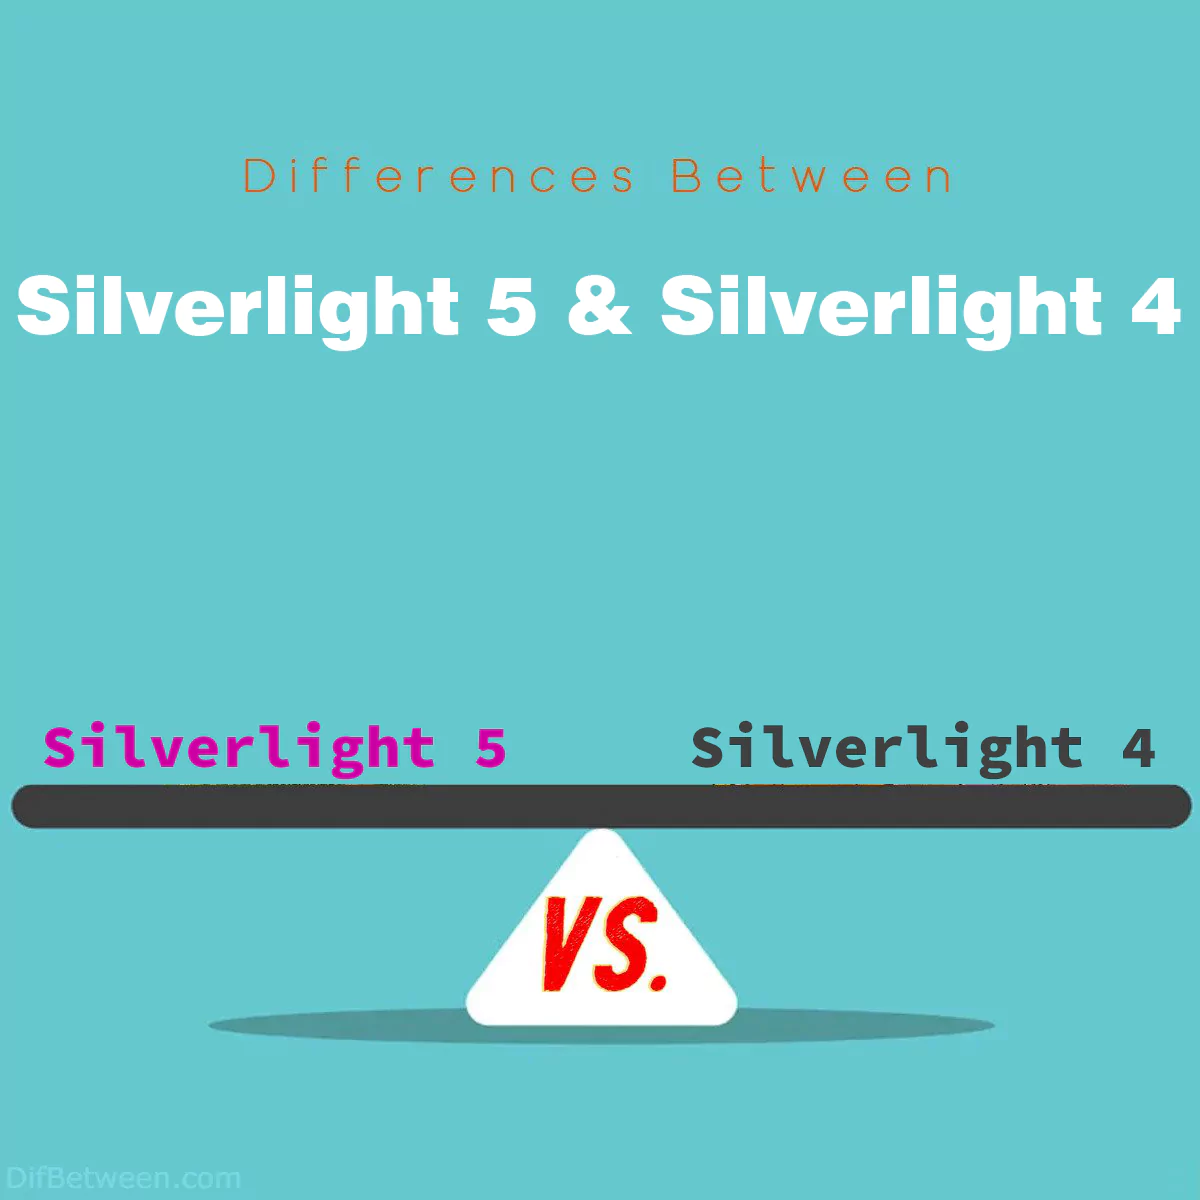 Differences Between Microsoft Silverlight 5 and Microsoft Silverlight 4